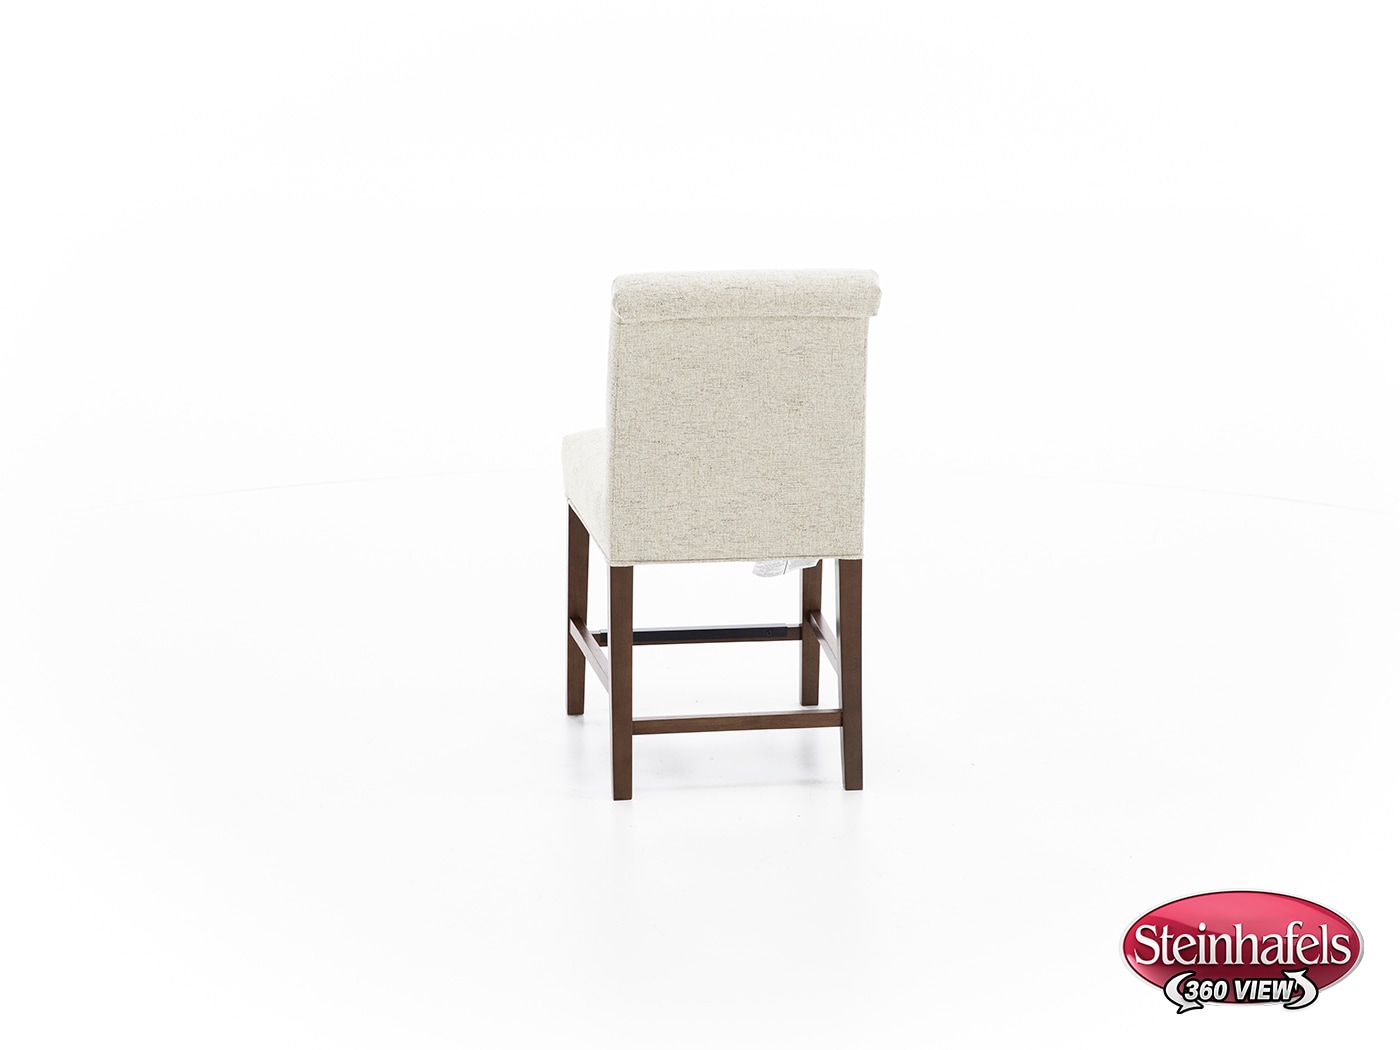 bsch beige  inch counter seat height stool  image   